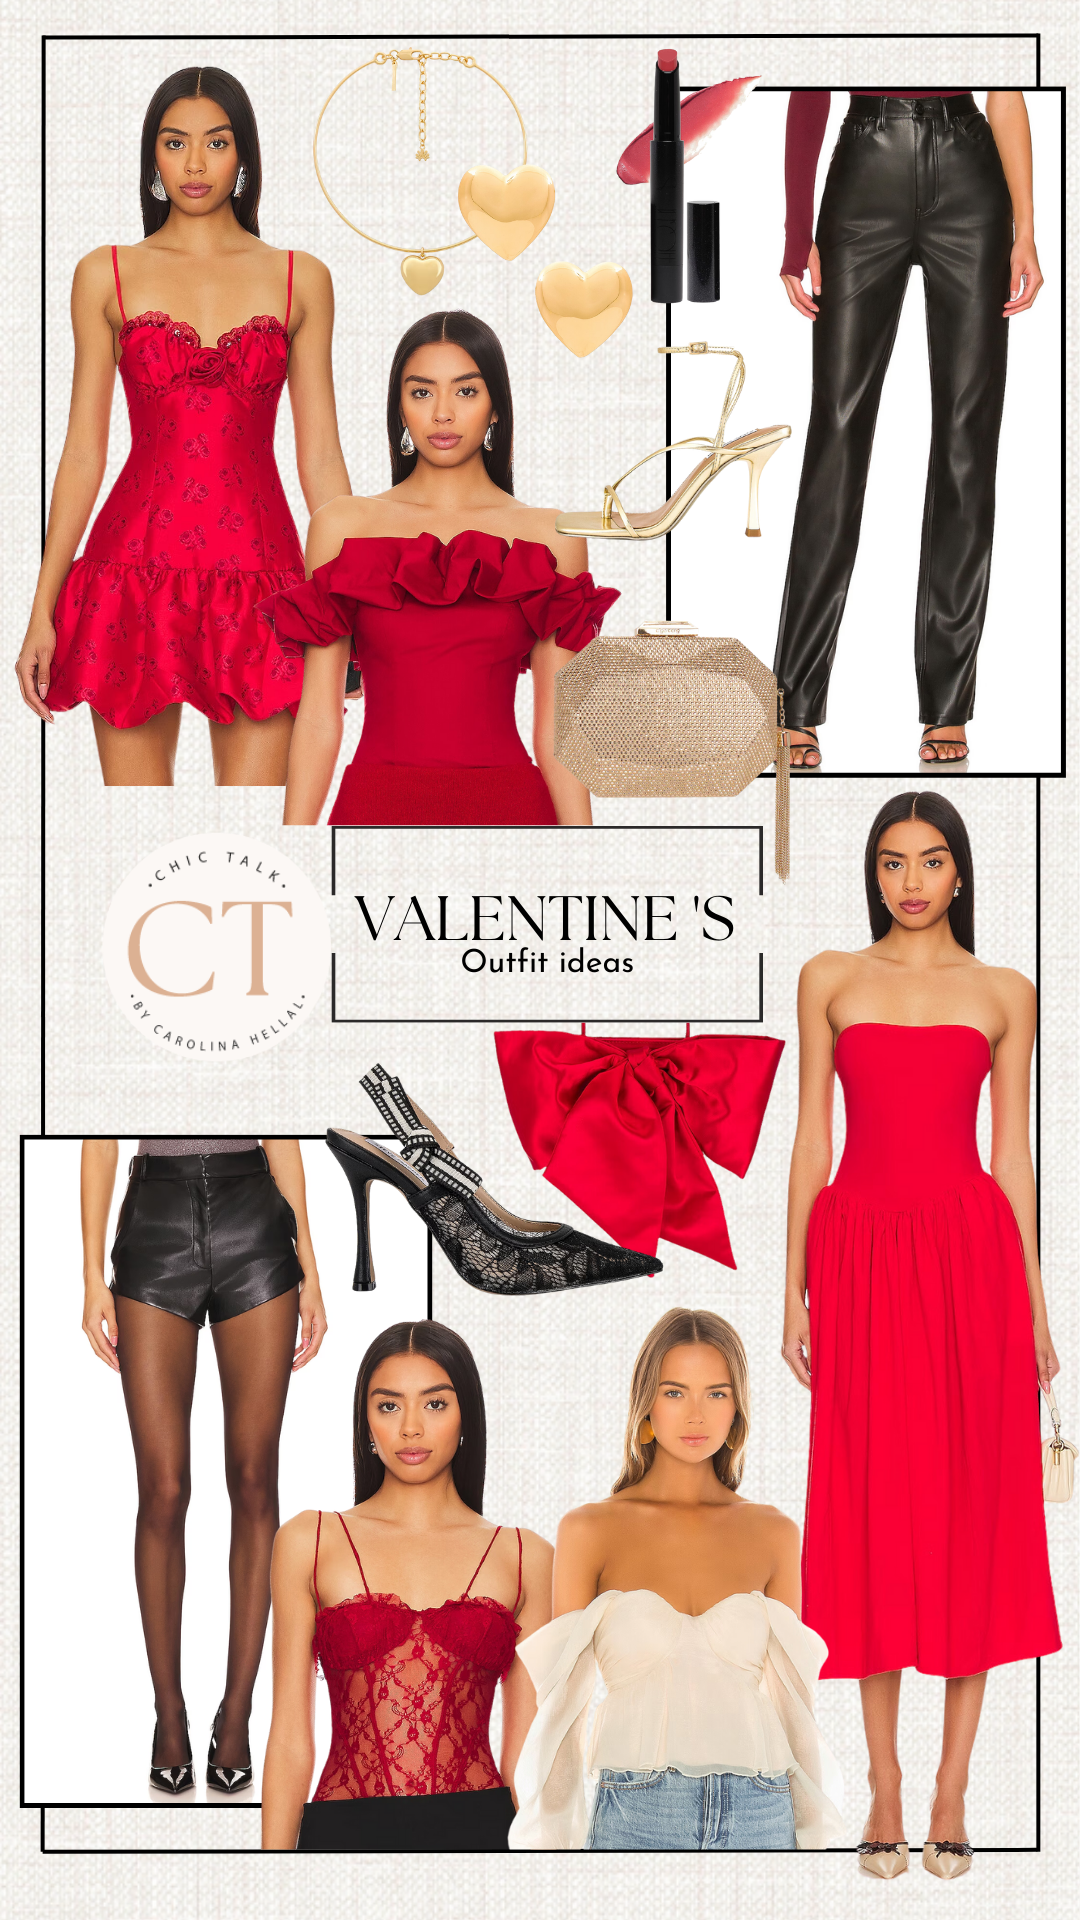 Valentine's outfit ideas